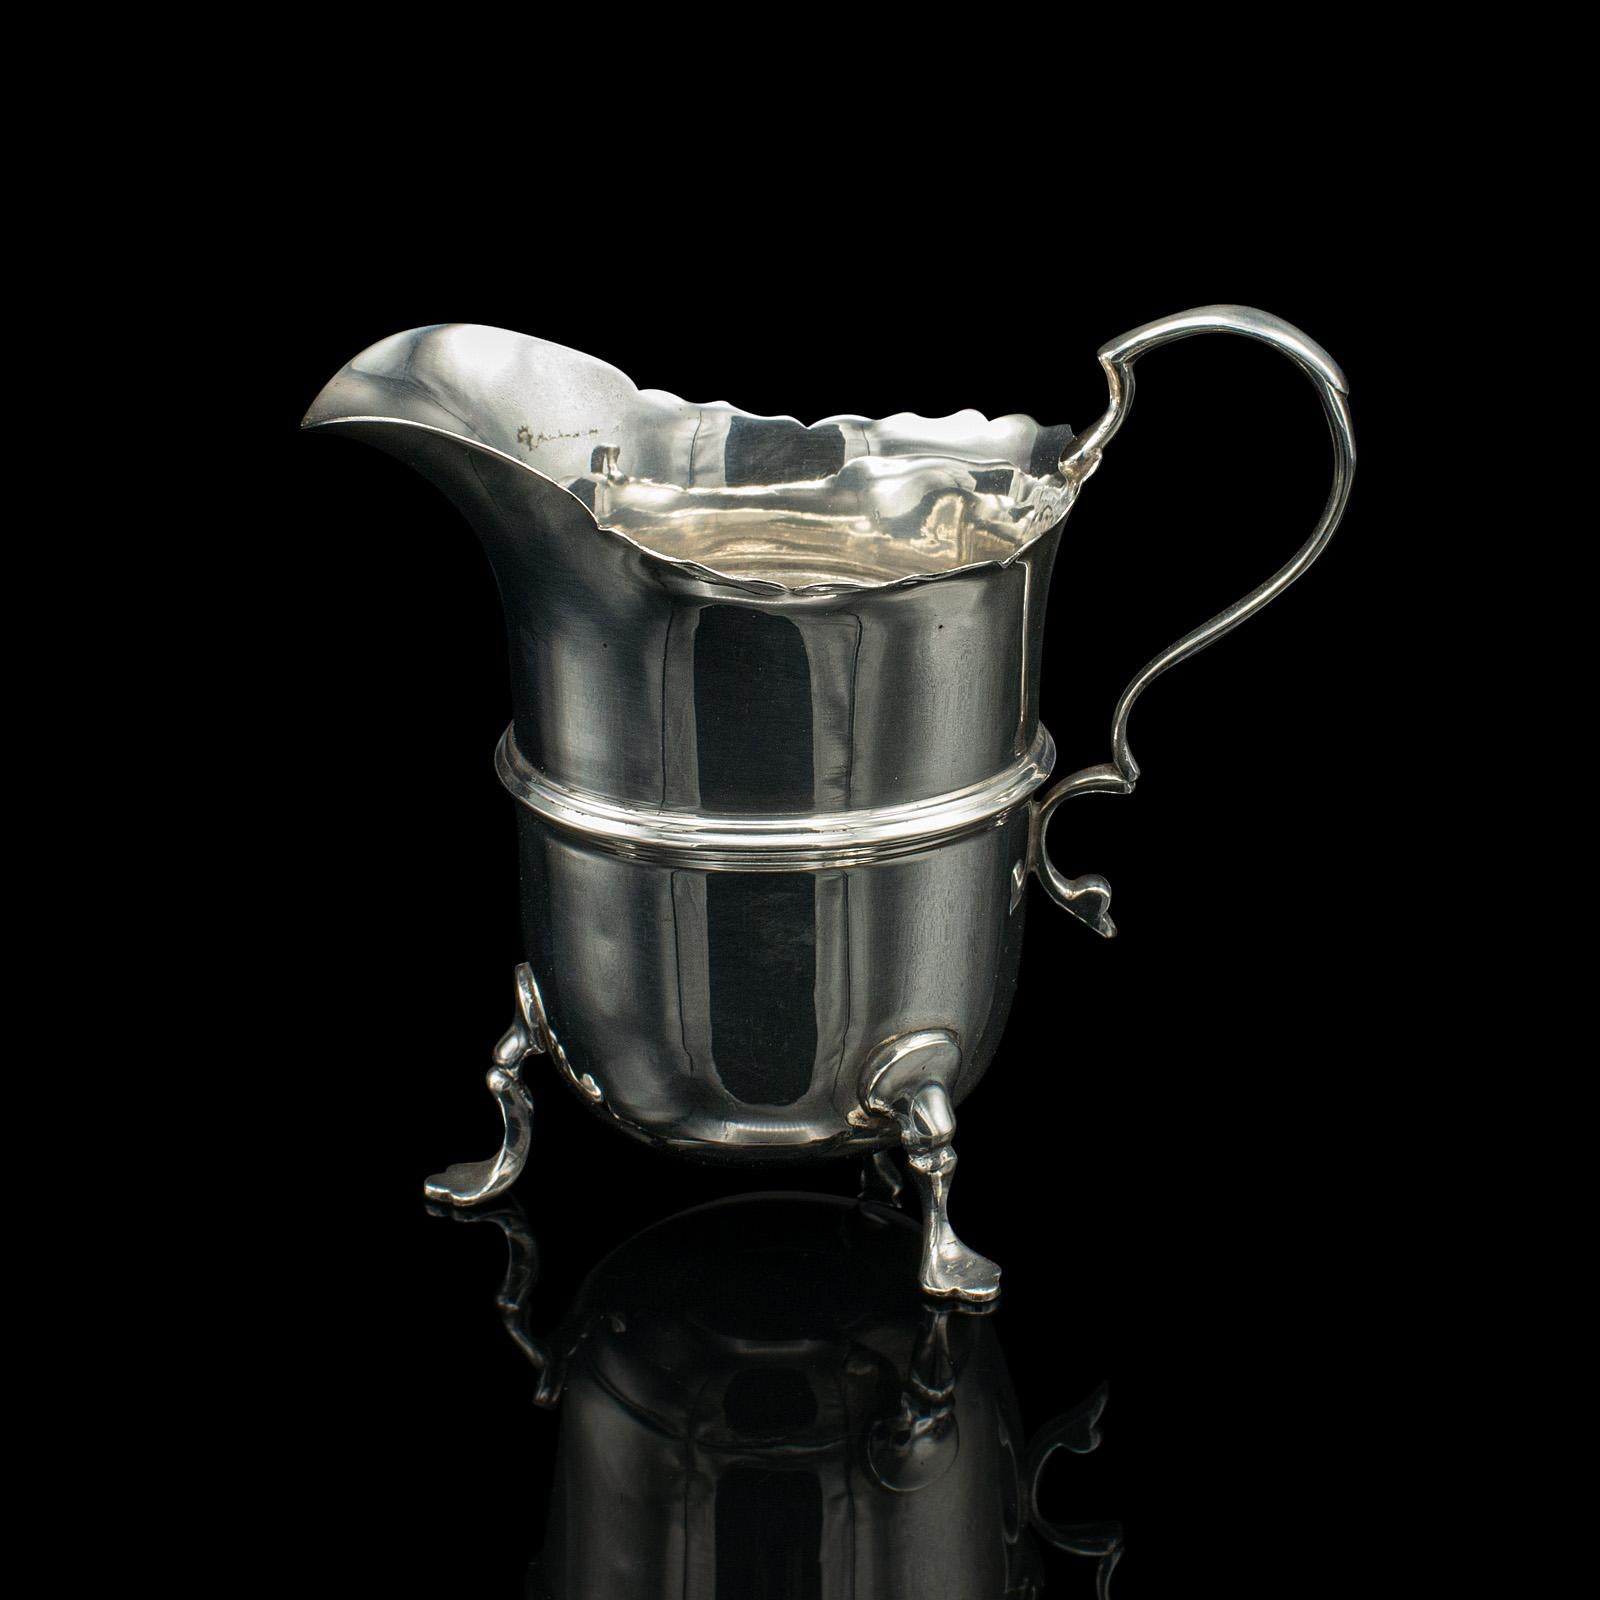 This is a small antique cream jug. An English, sterling silver milk pourer, dating to the early 20th century, hallmarked 1919.

Darling breakfast table pourer, with a superb reflective quality
Displays a desirable aged patina and in good original